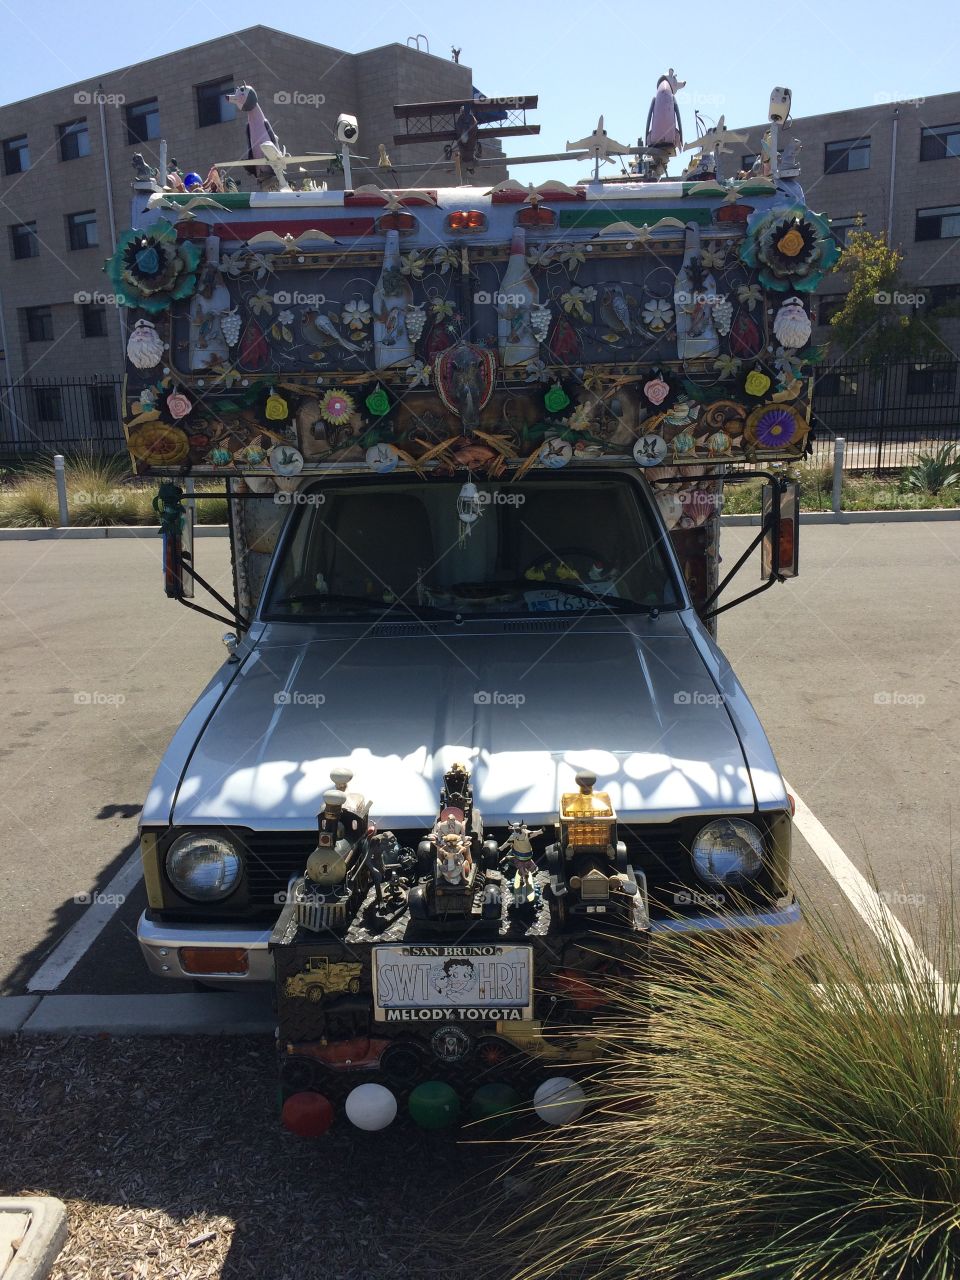 SD Vibes!
This RIG has CuLtURe!
One man's junk = another man's treasure!